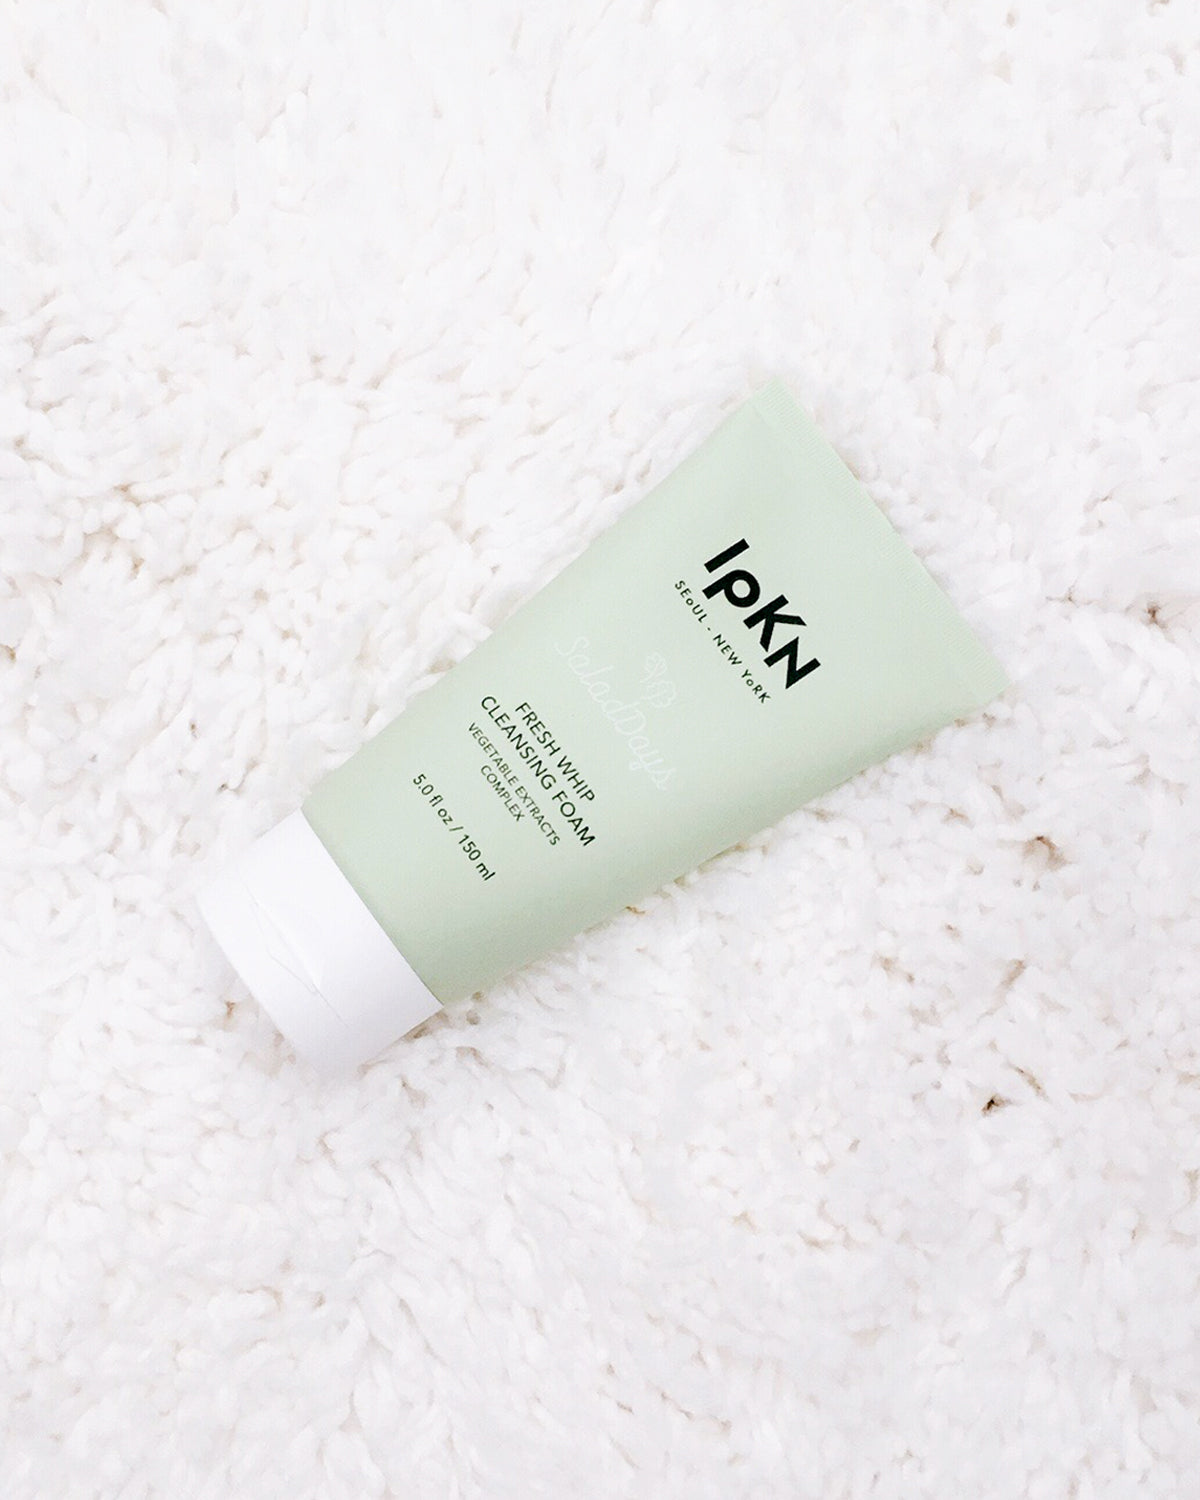 Salad Days!  A vitamin-enriched cleansing foam deeply cleanses and removes makeup, toxins, and impurities from the skin both day & night while hydrating the skin. Vegetable particles such as Kale and Whet help improve the appearance of skin elasticity and hydration for younger looking skin!